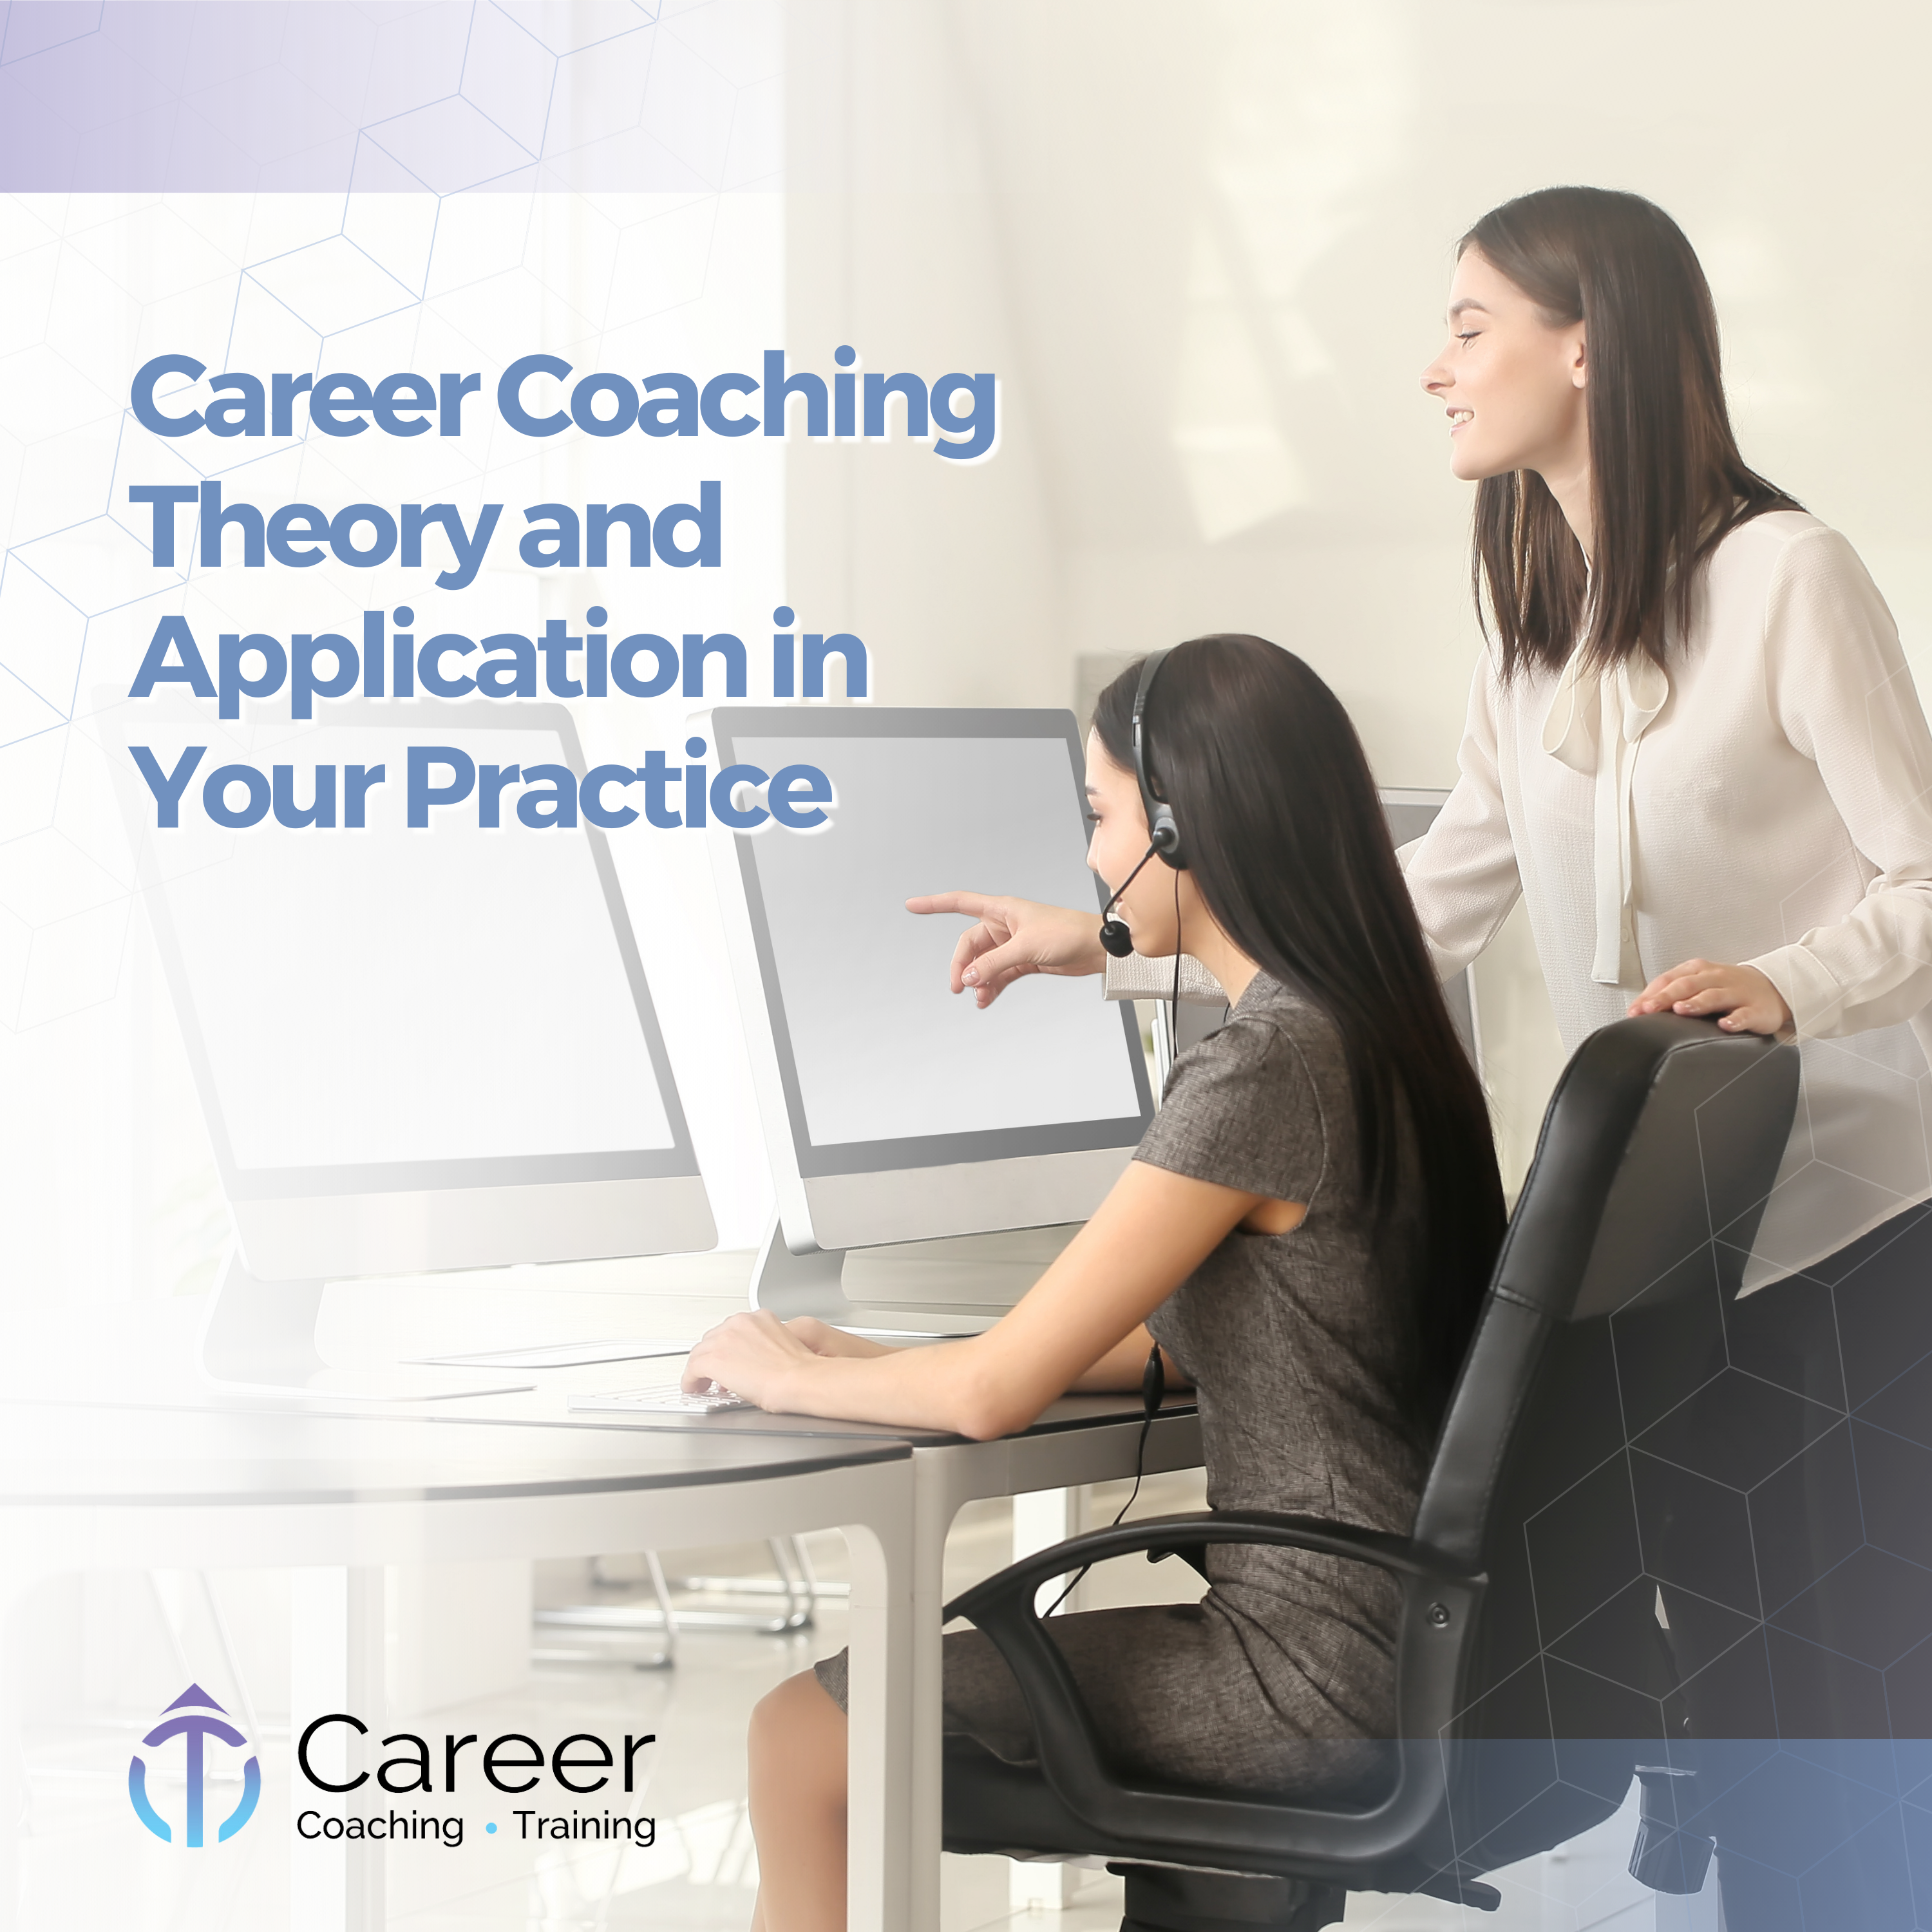 Career Coaching Theory and Application in Your Practice